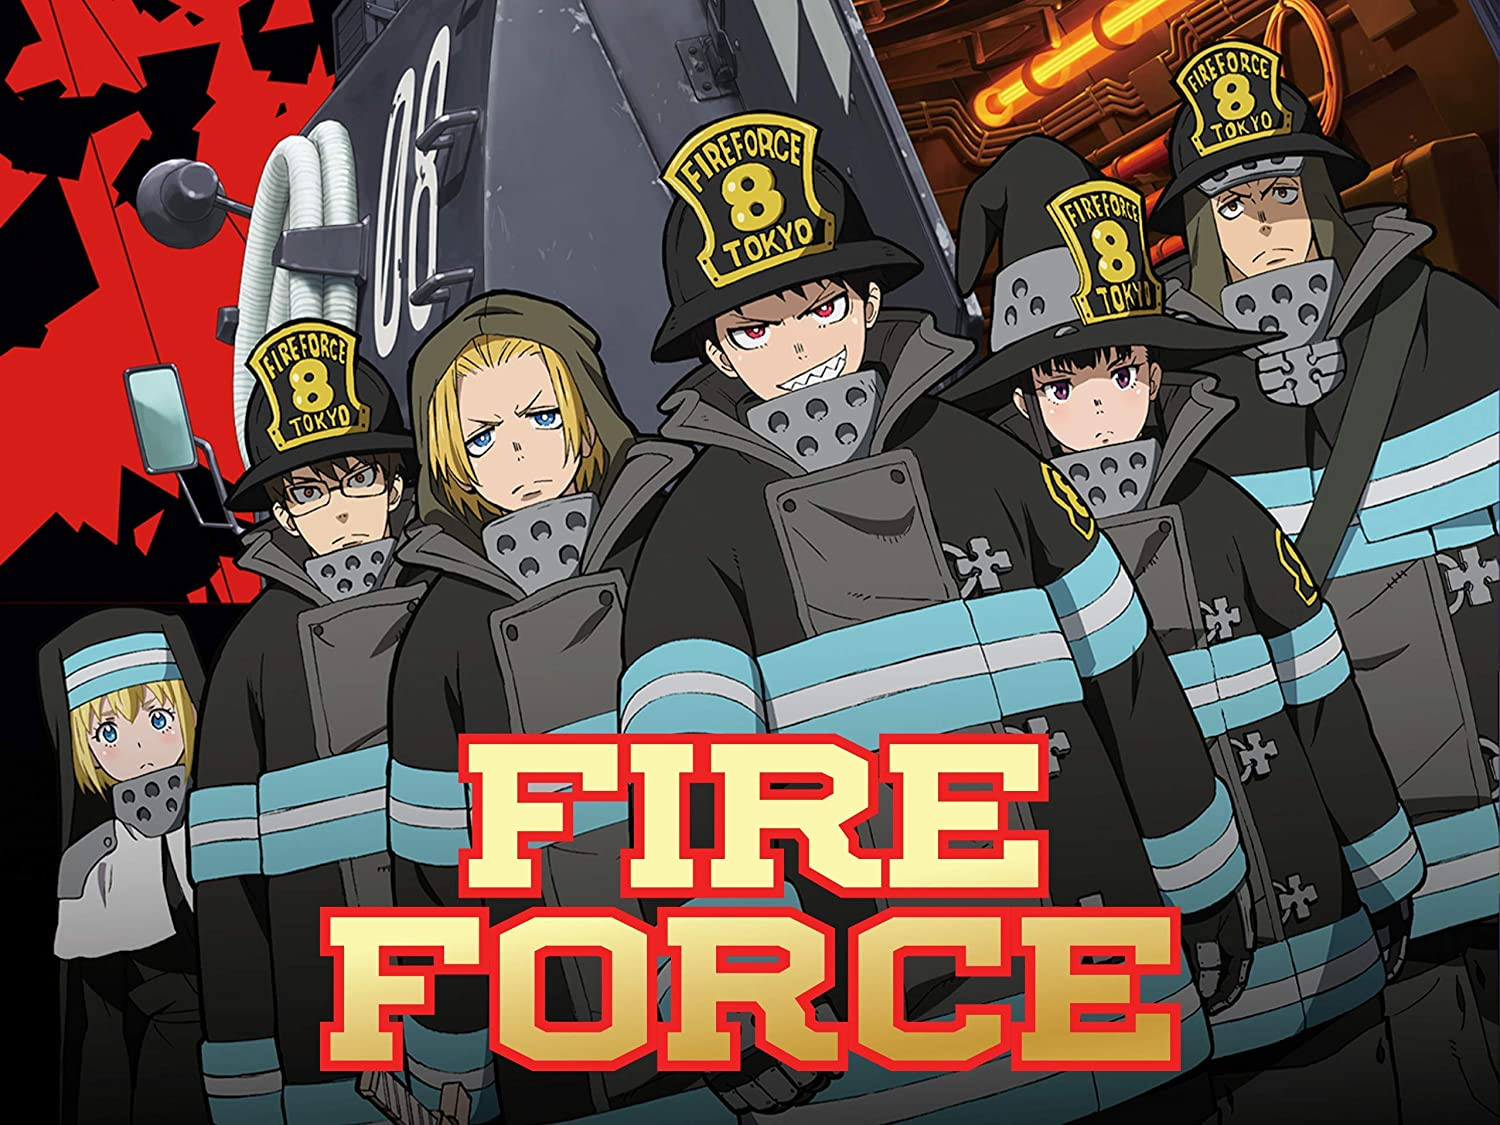 REVIEW: 'Fire Force,' Season 2 Episode 21 - “Enemy Contact” - But Why Tho?